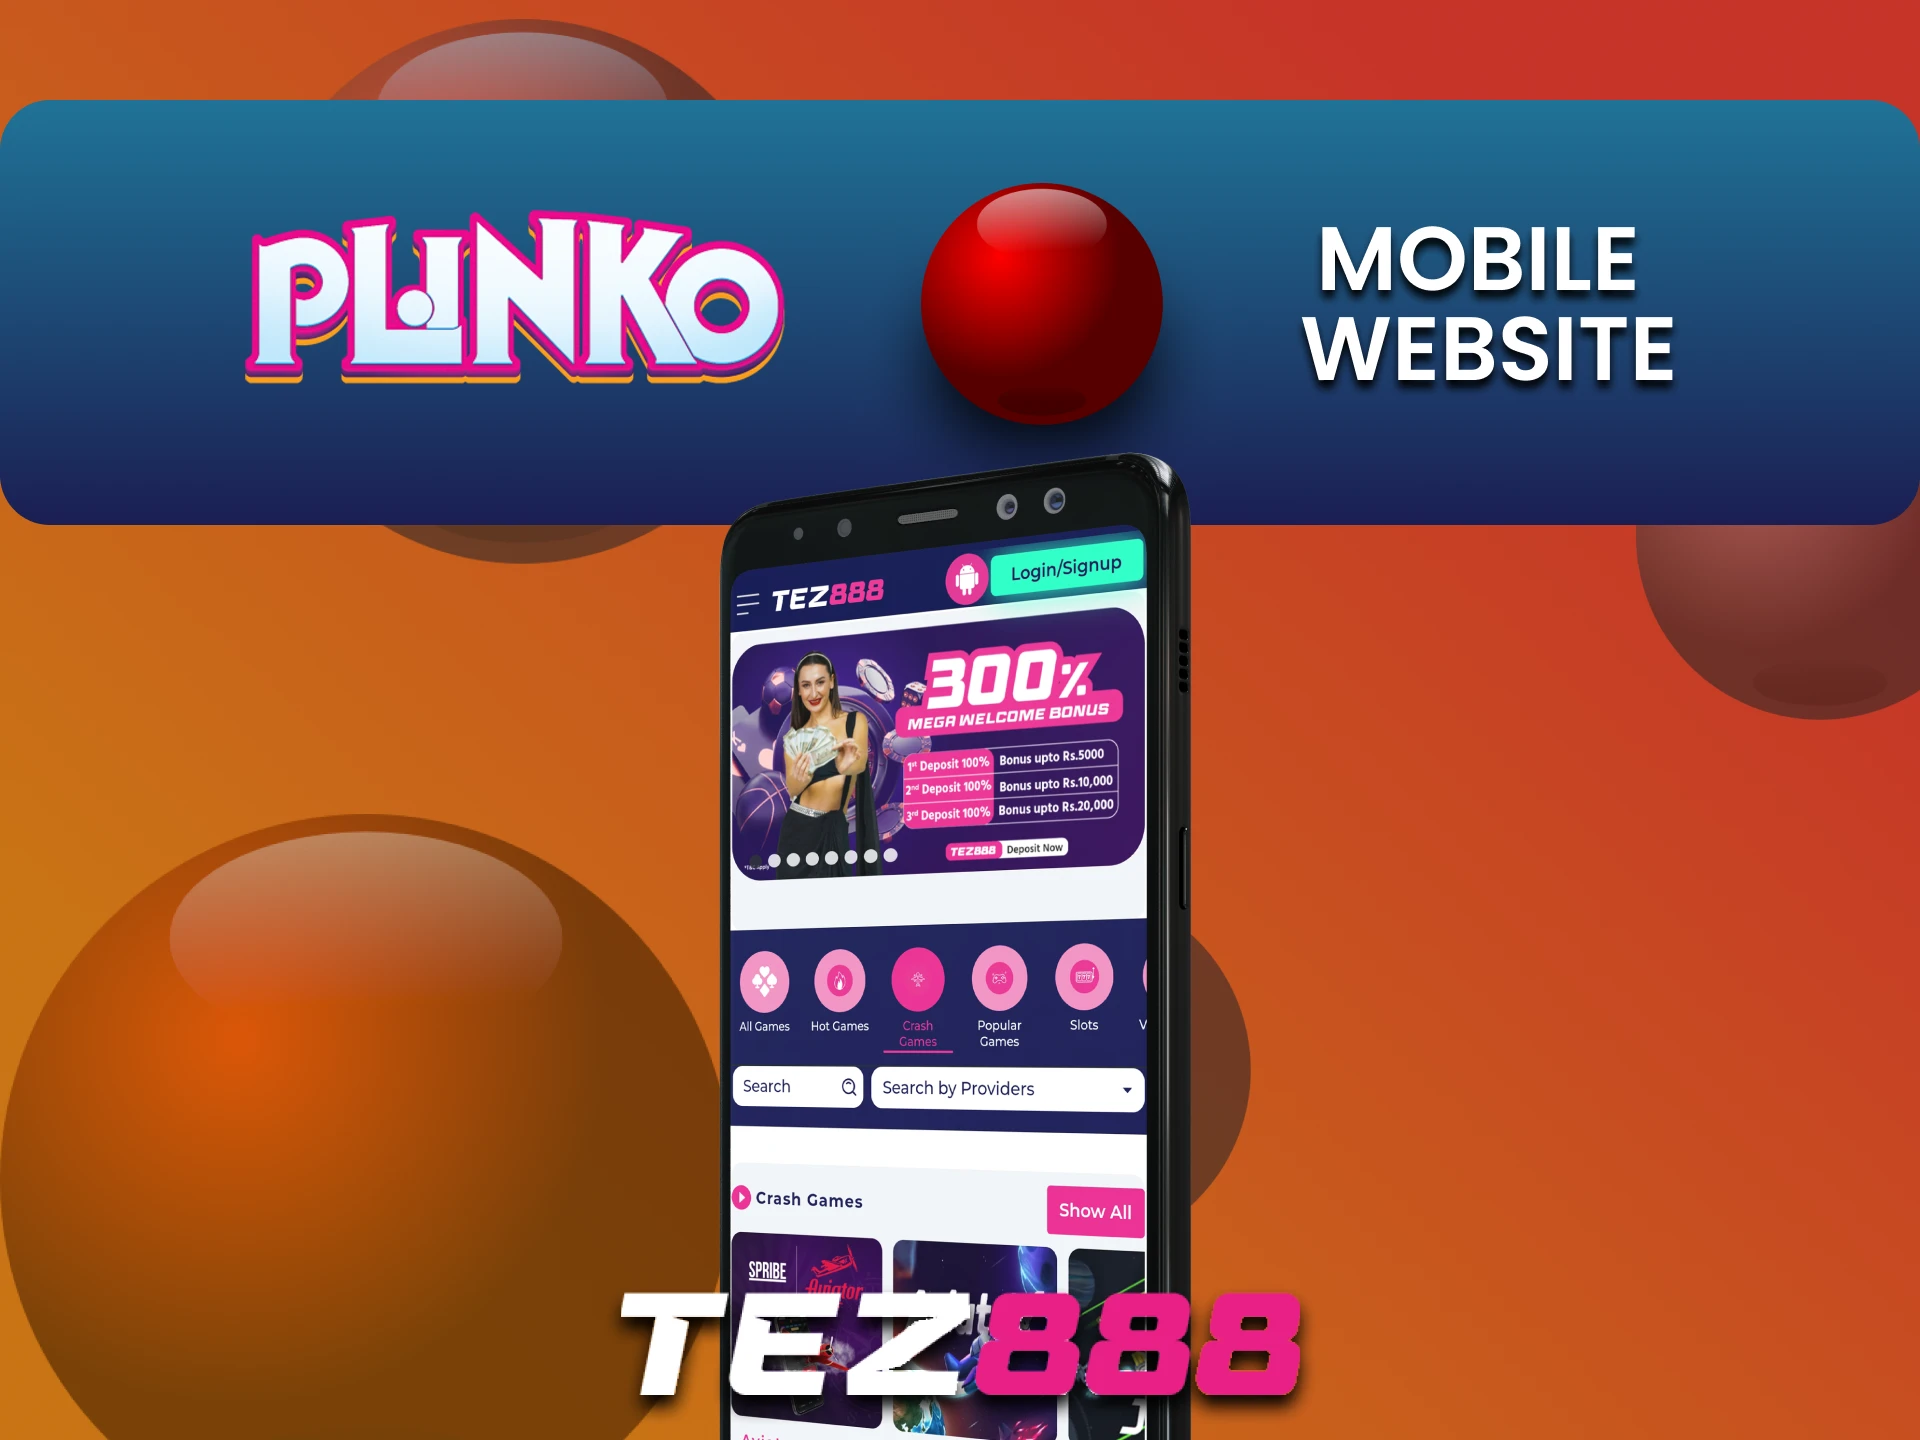 Phone is one of the ways to play Plinko on the Tez888 website.